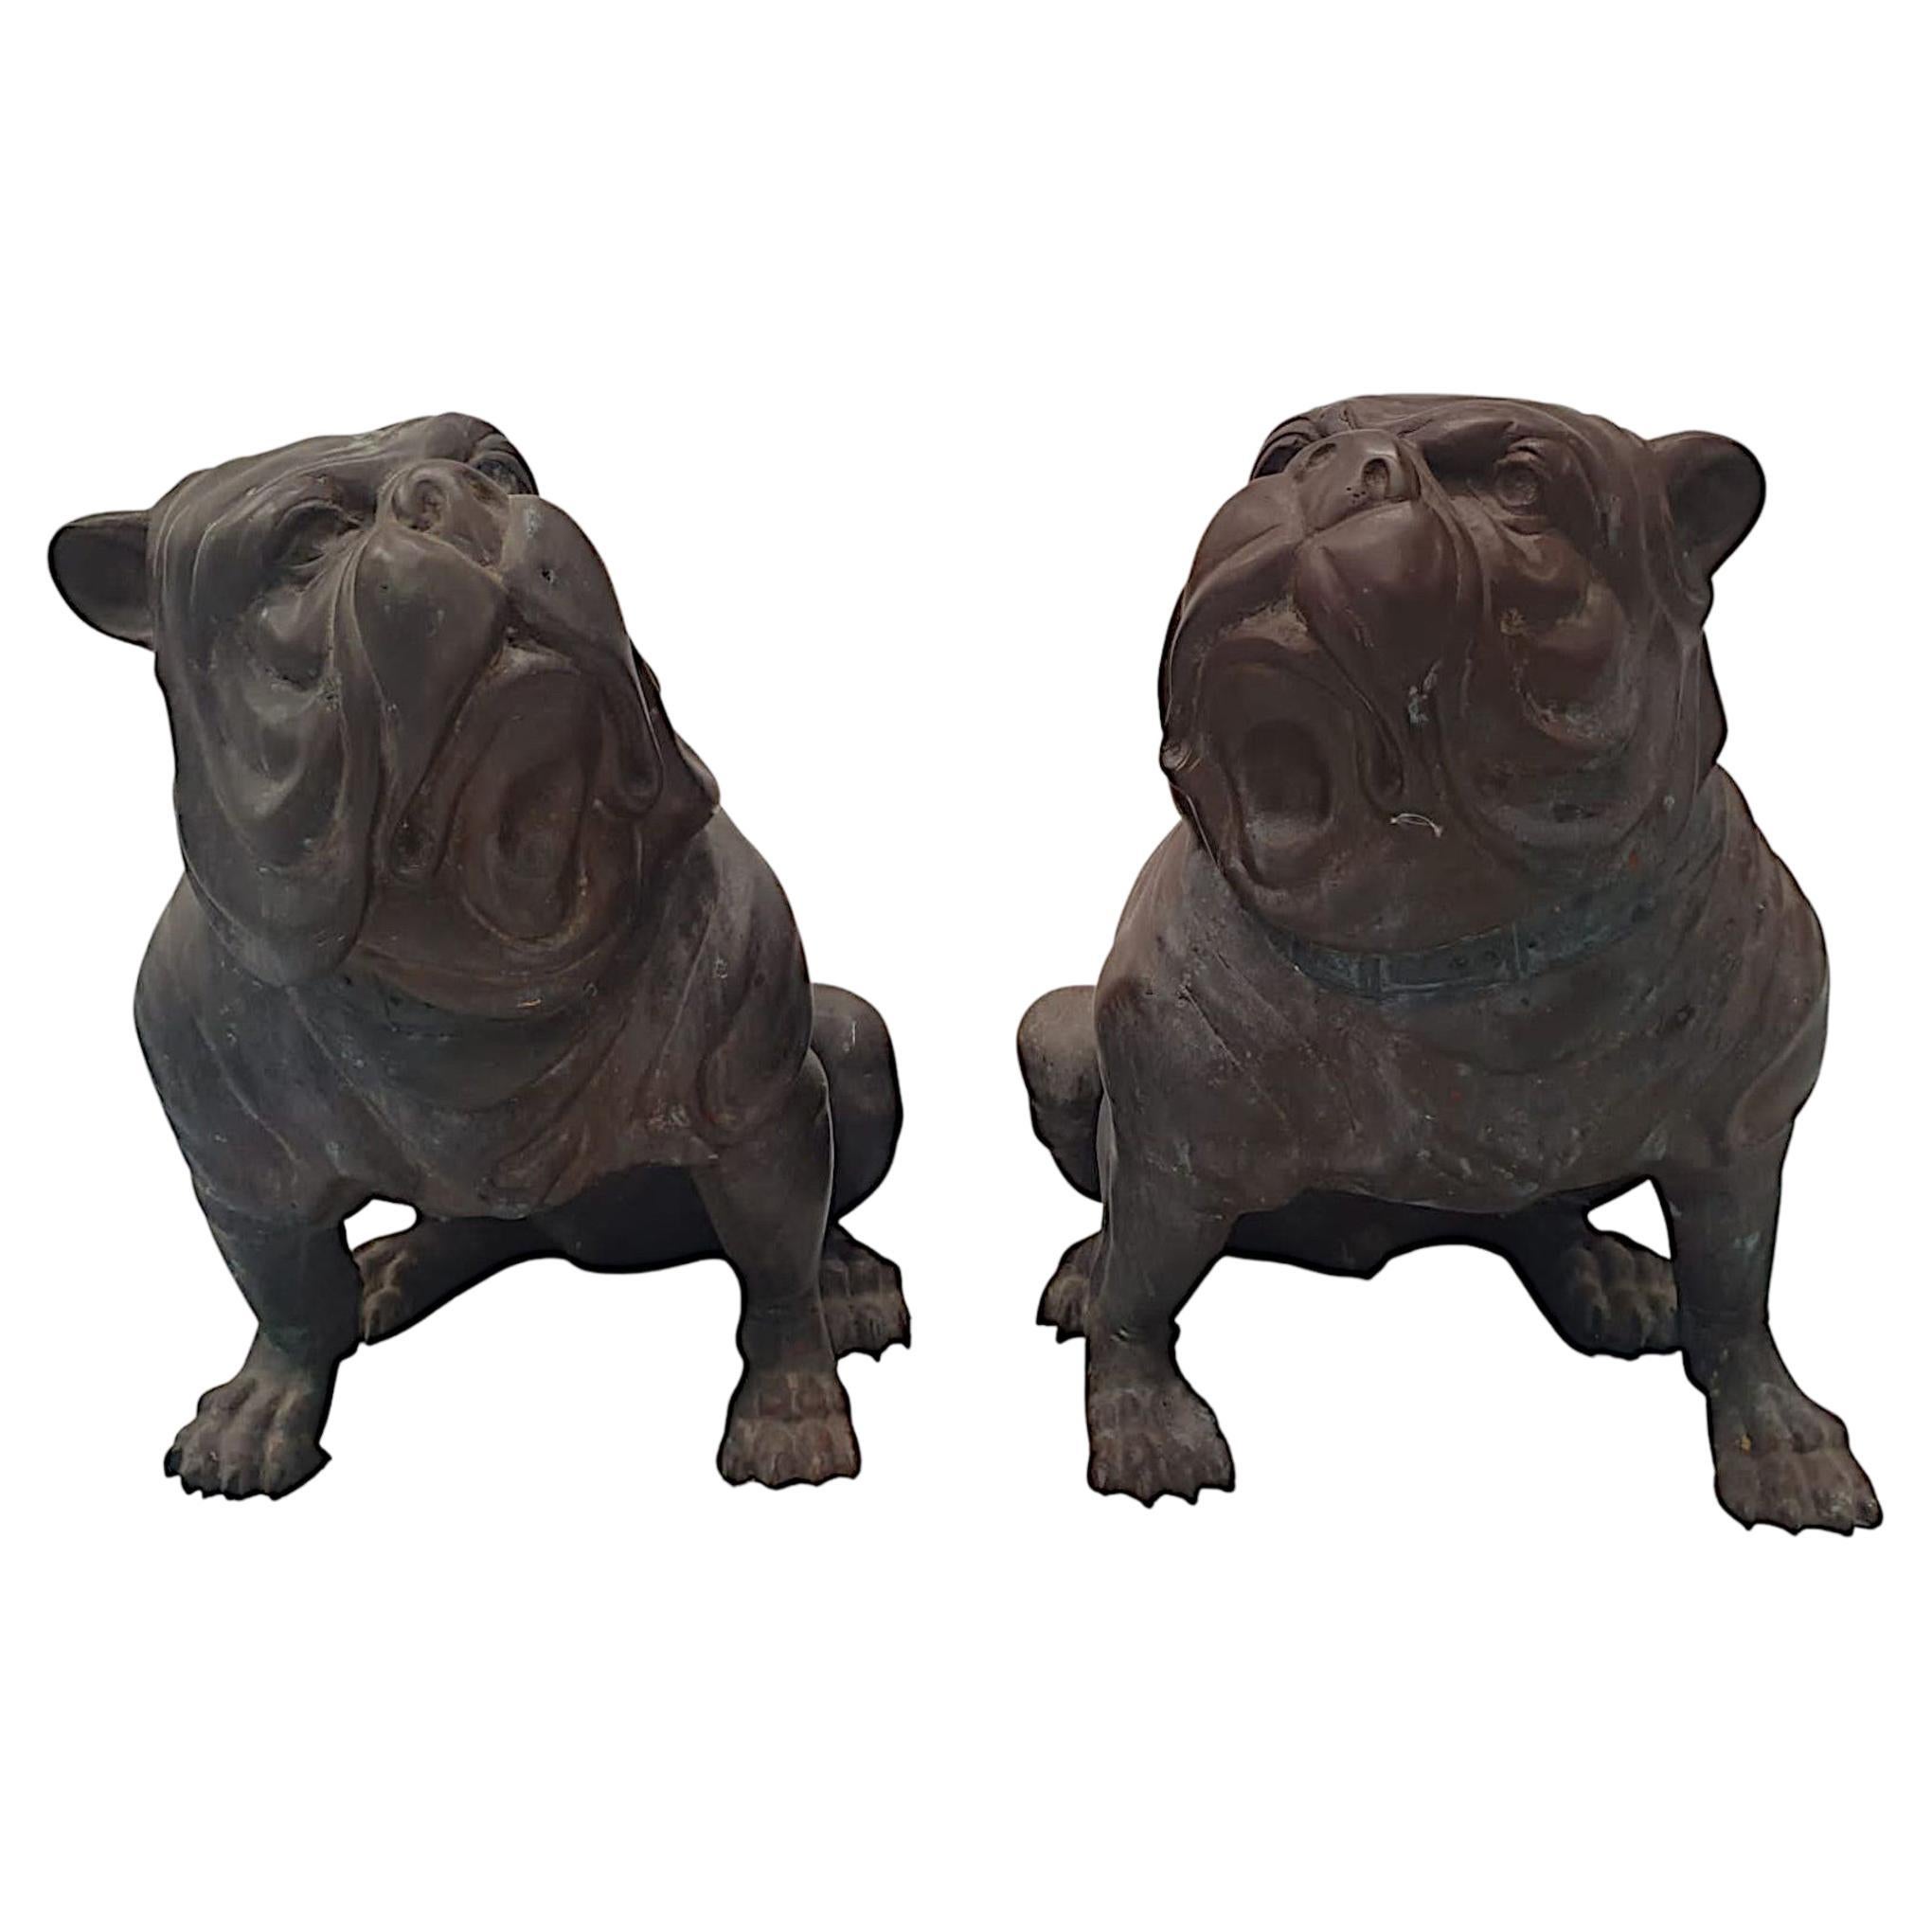 Very Rare and Fine Early 20th Century Pair of Animalier Bronze Bull Dogs For Sale